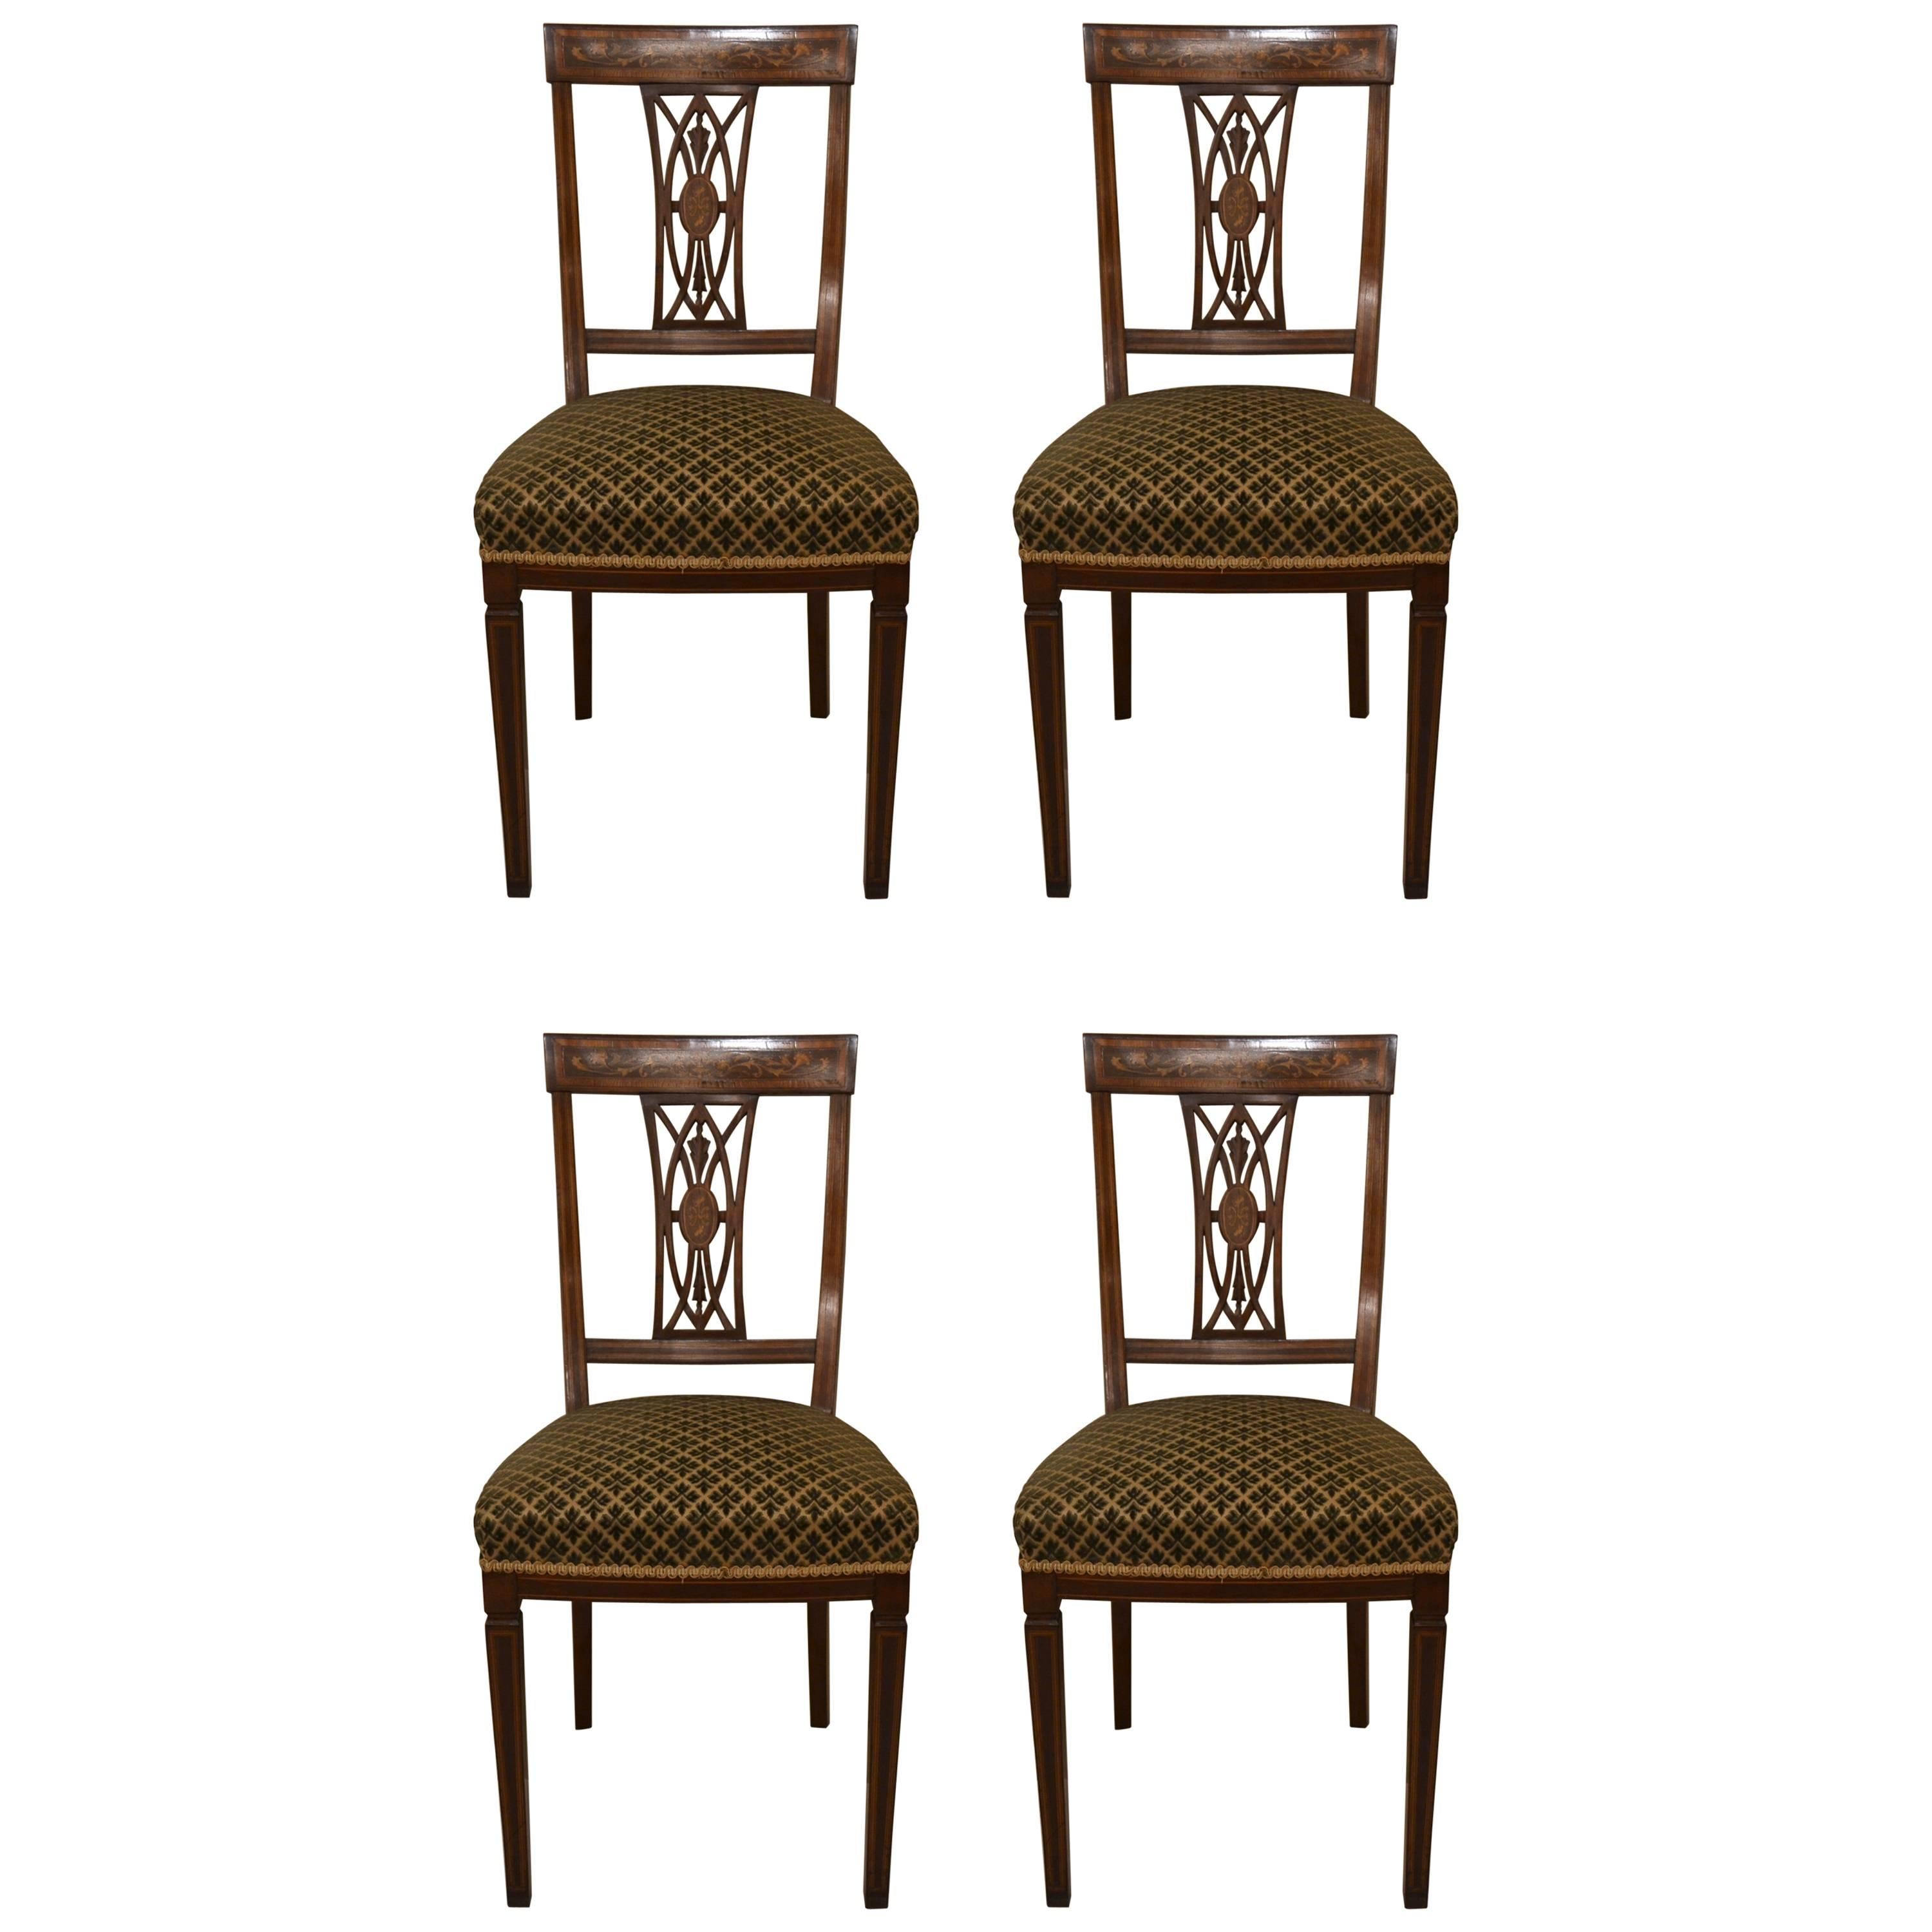 Four Antique English Inlaid Side Chairs